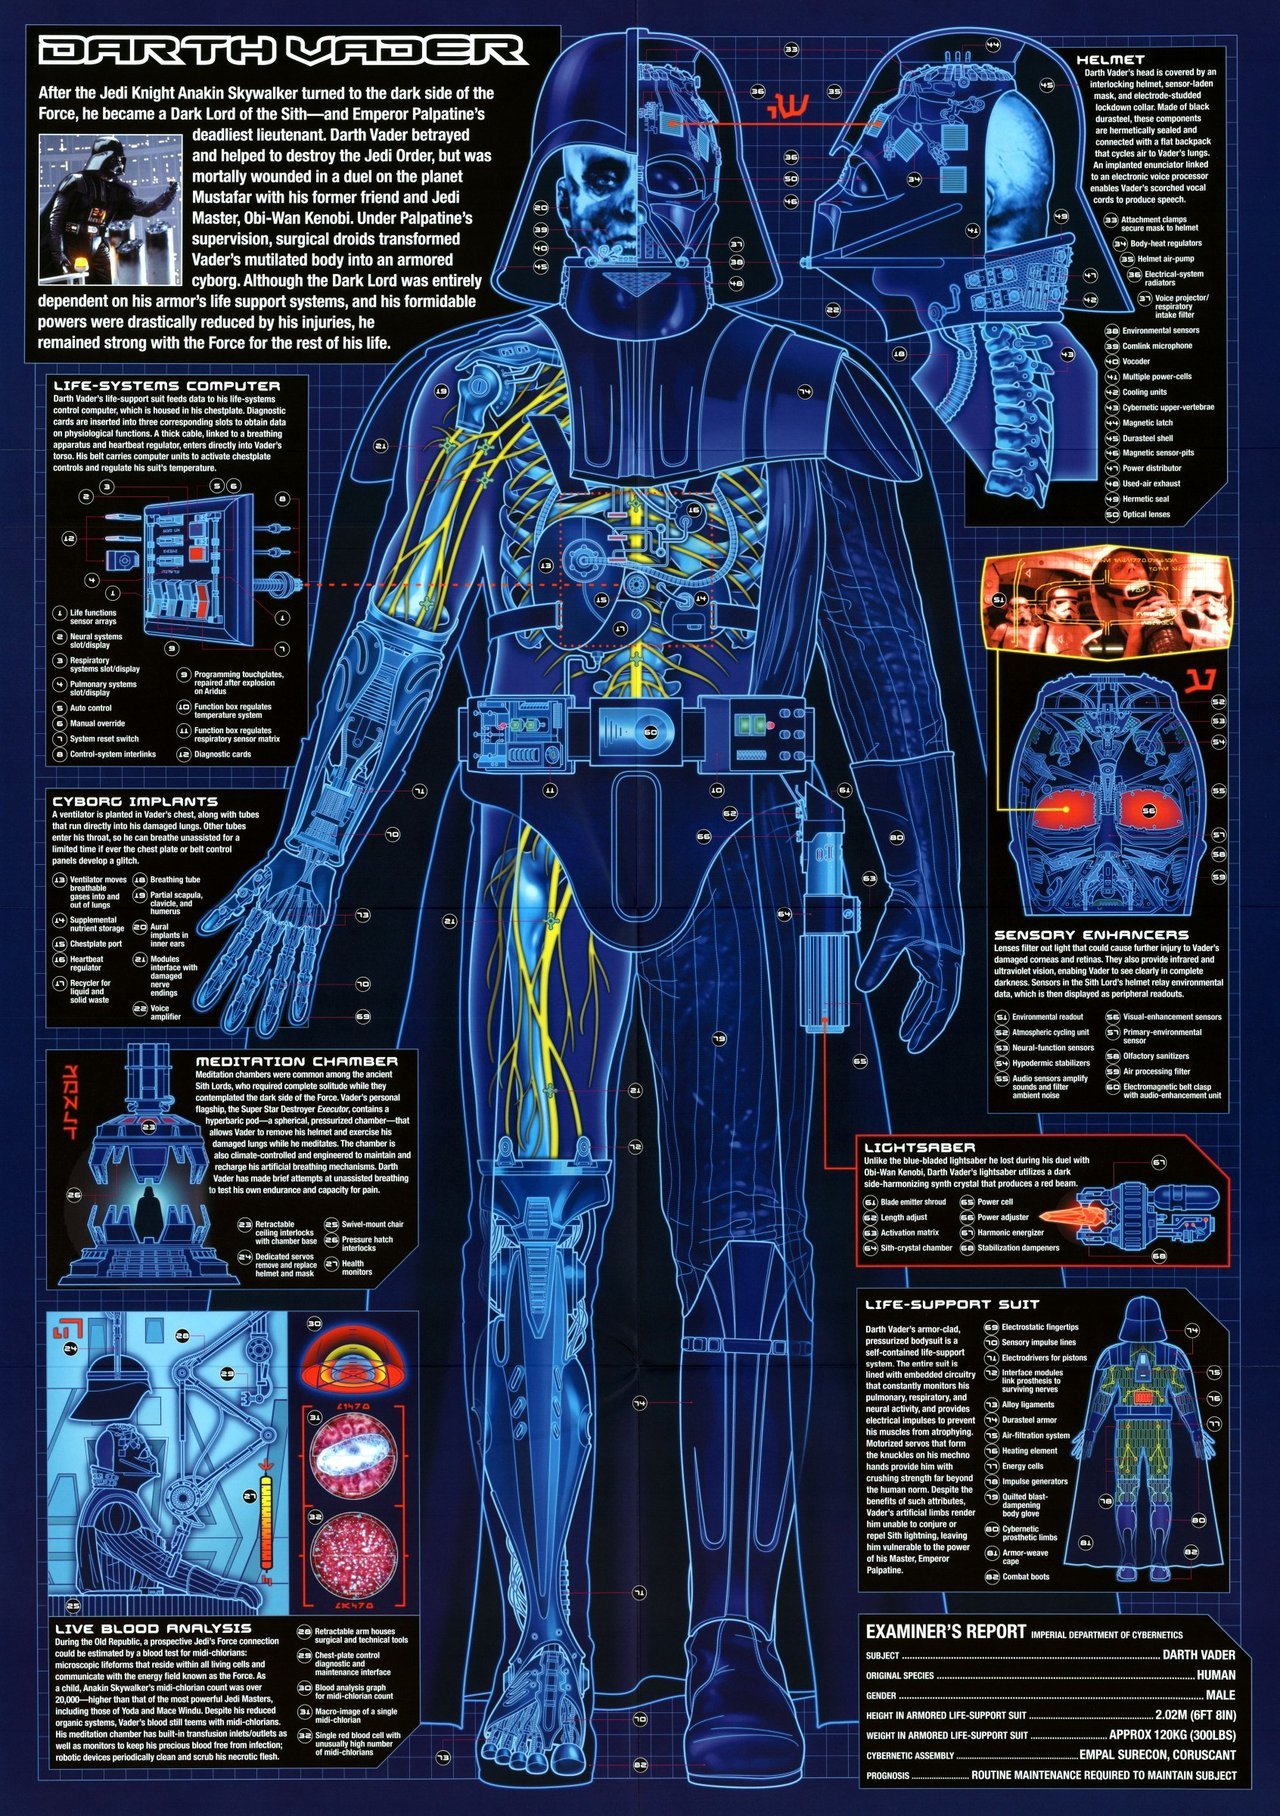 Consumed By Star Wars Feelings Darth Vader Blueprint While The Surface Design Of